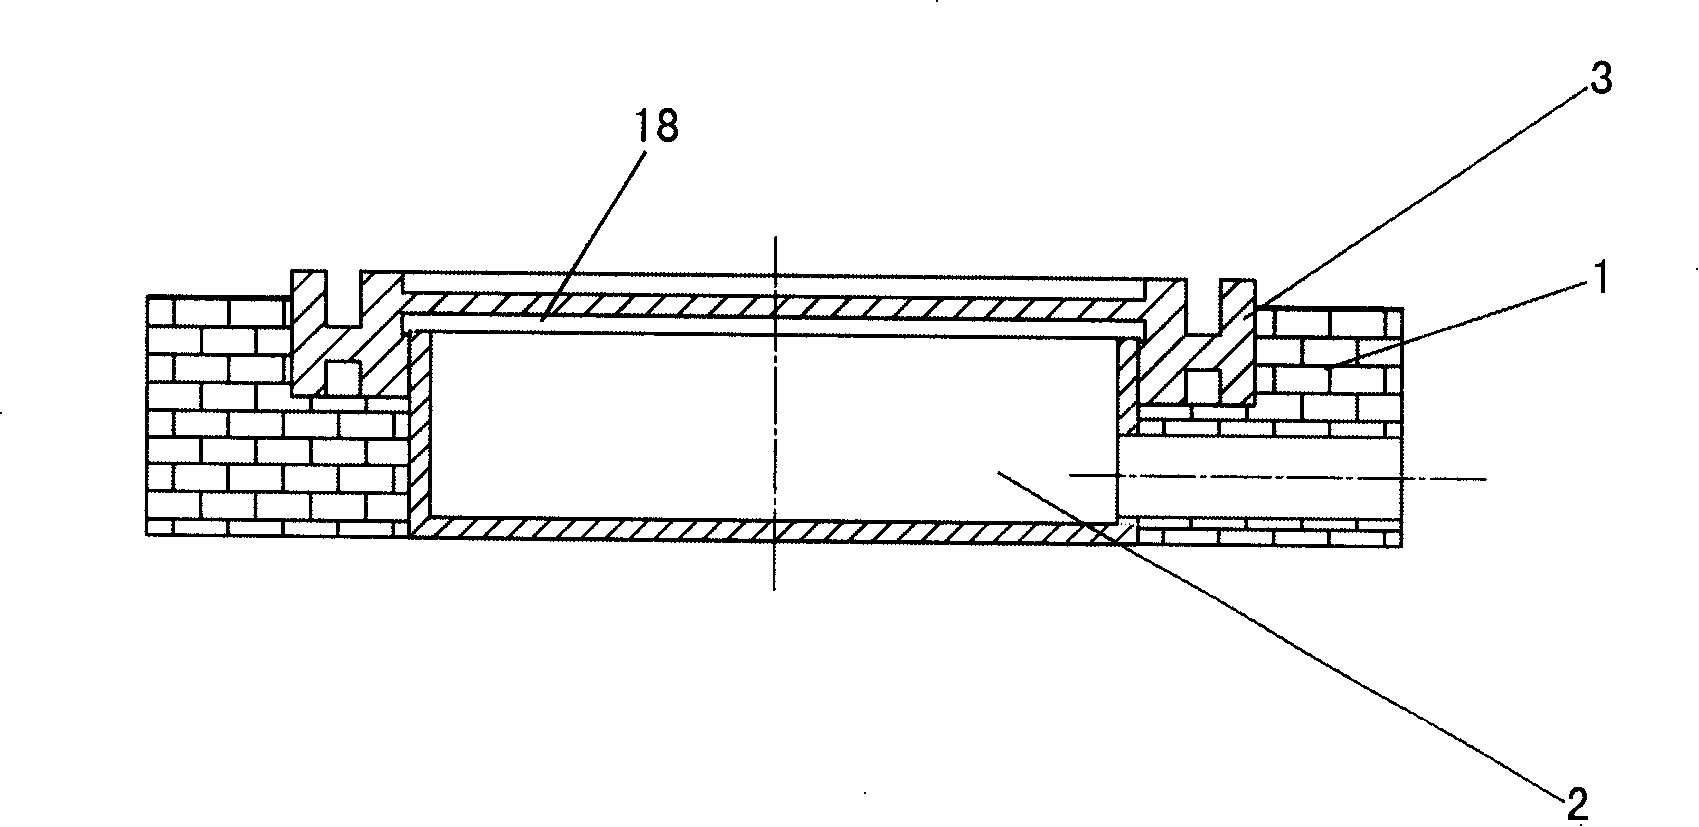 Measuring apparatus for fabric dynamic heat and moisture transmission characteristic